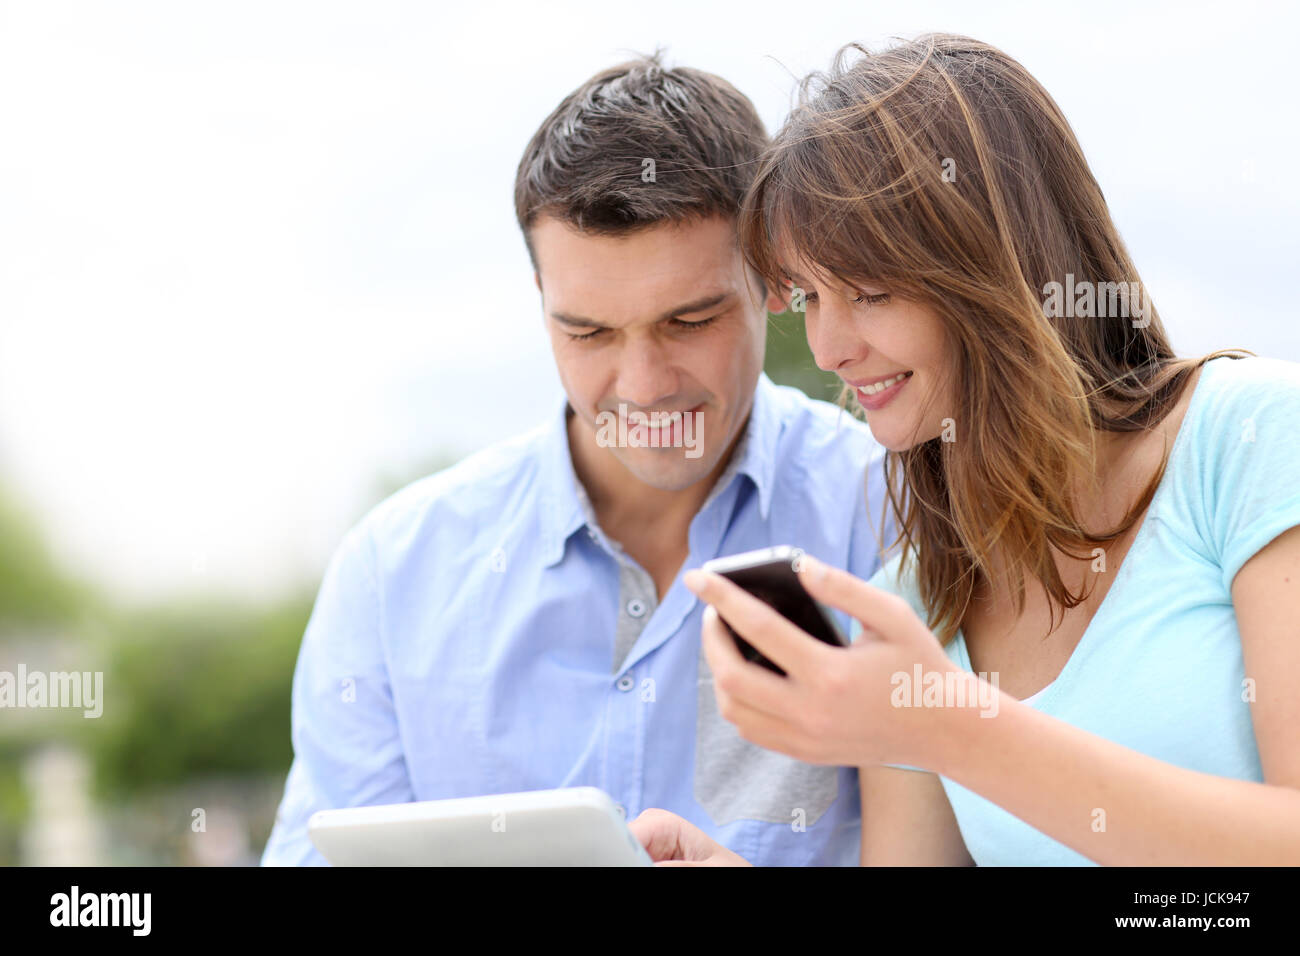 Couple using tablet and cellphone in public park Stock Photo